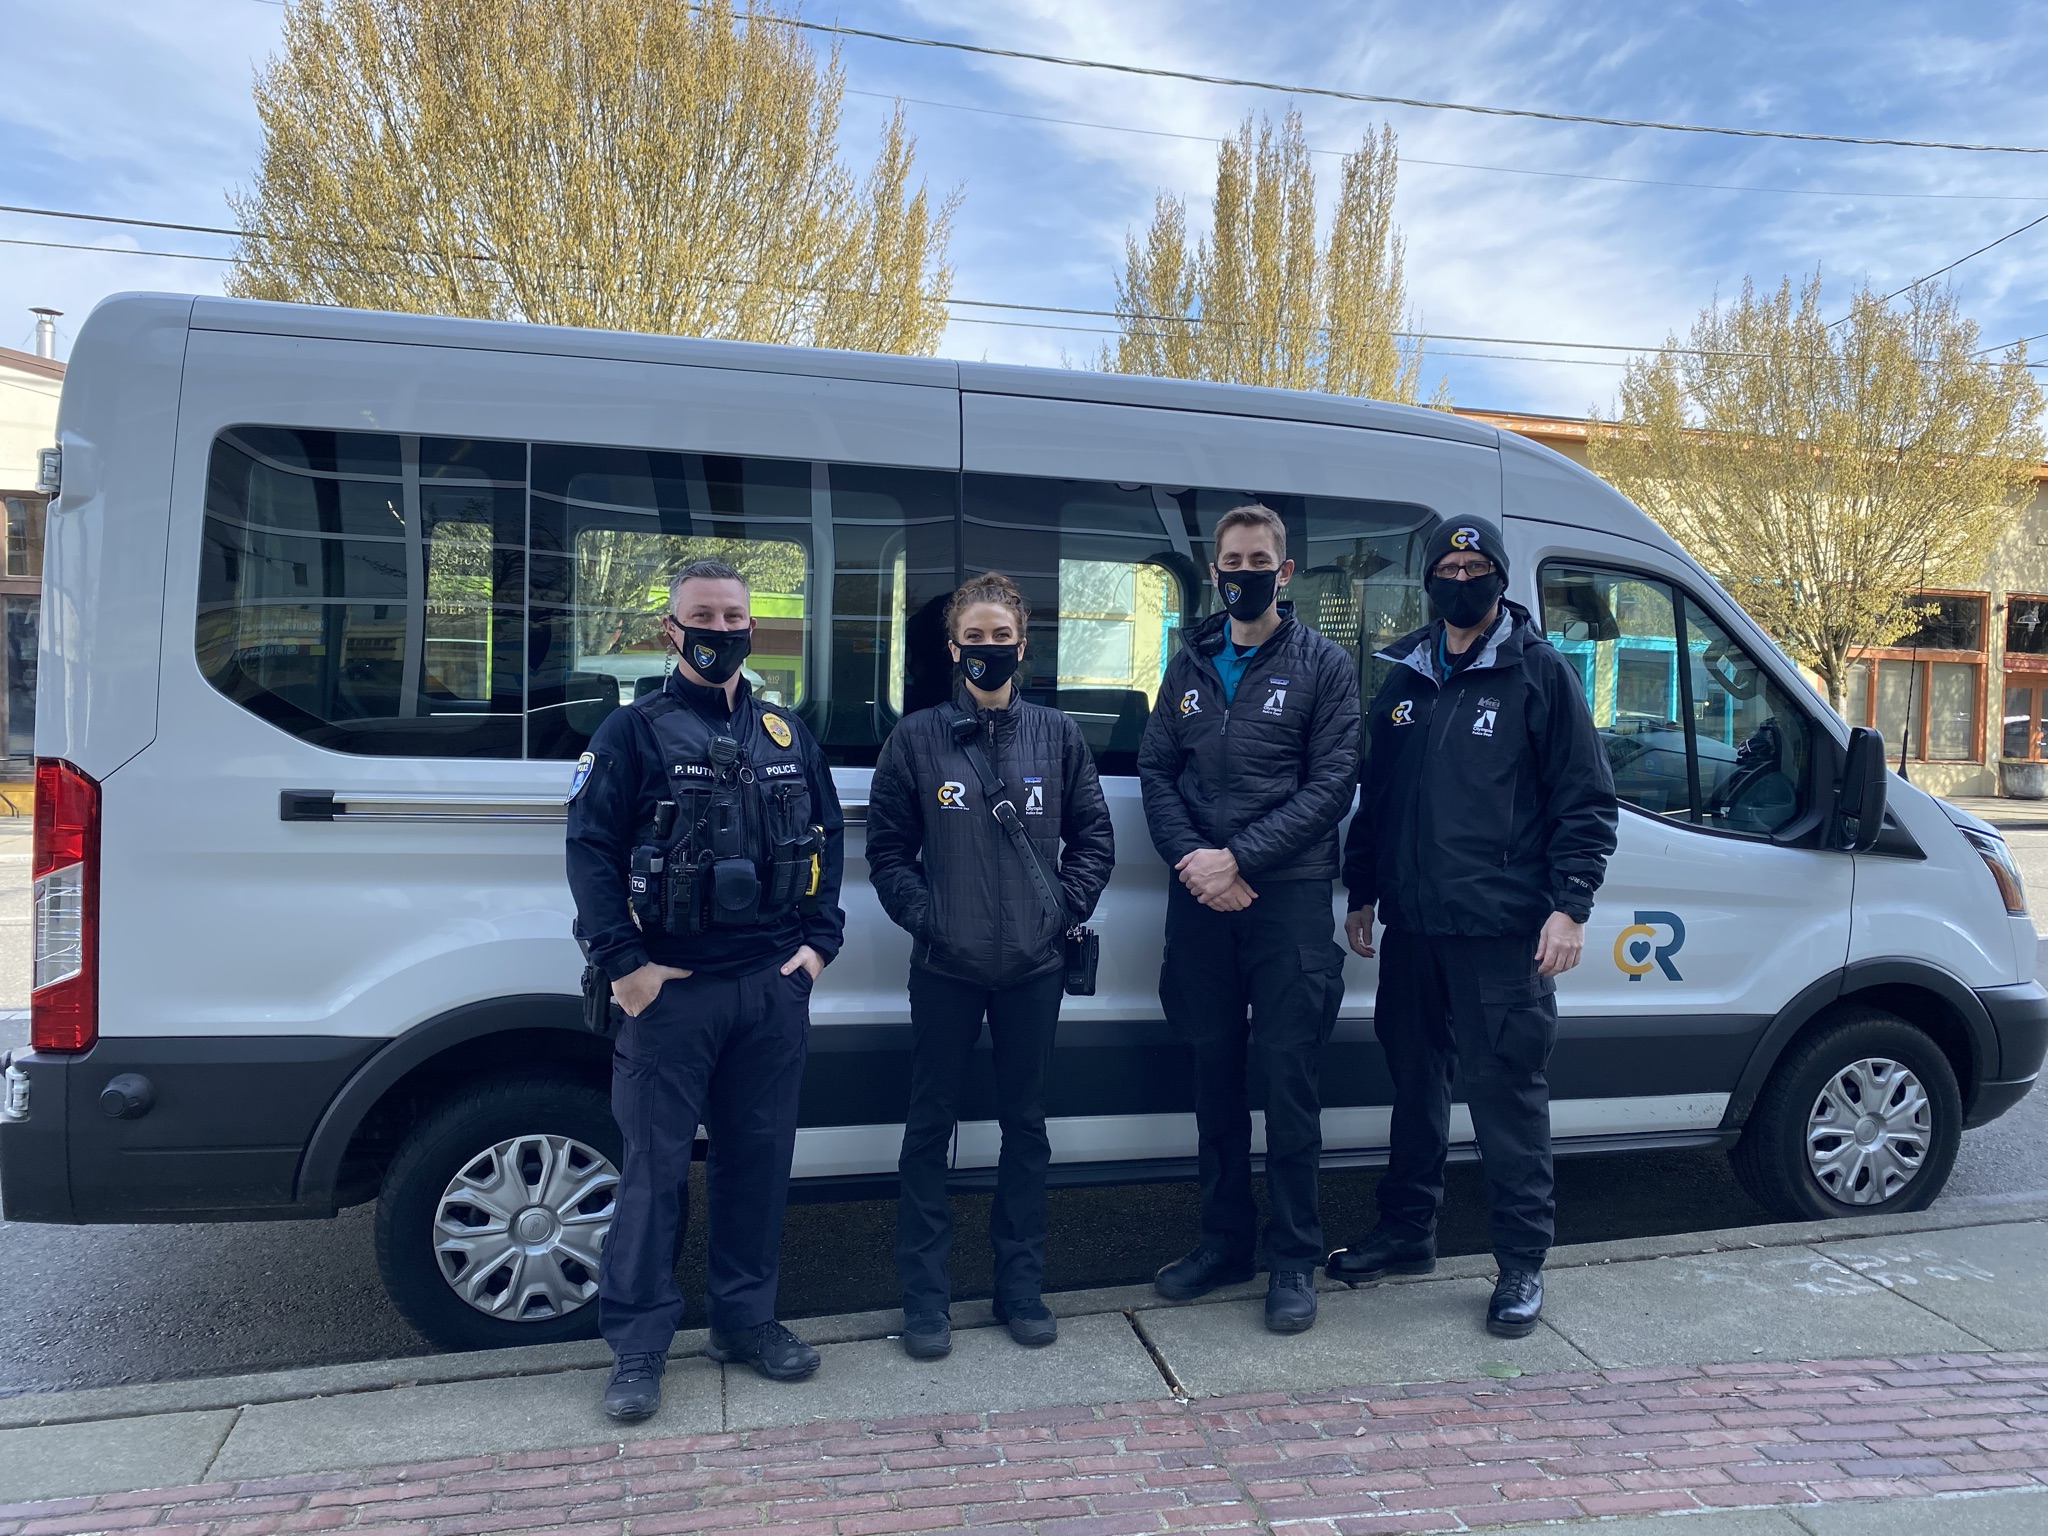 Olympia, WA van and officers